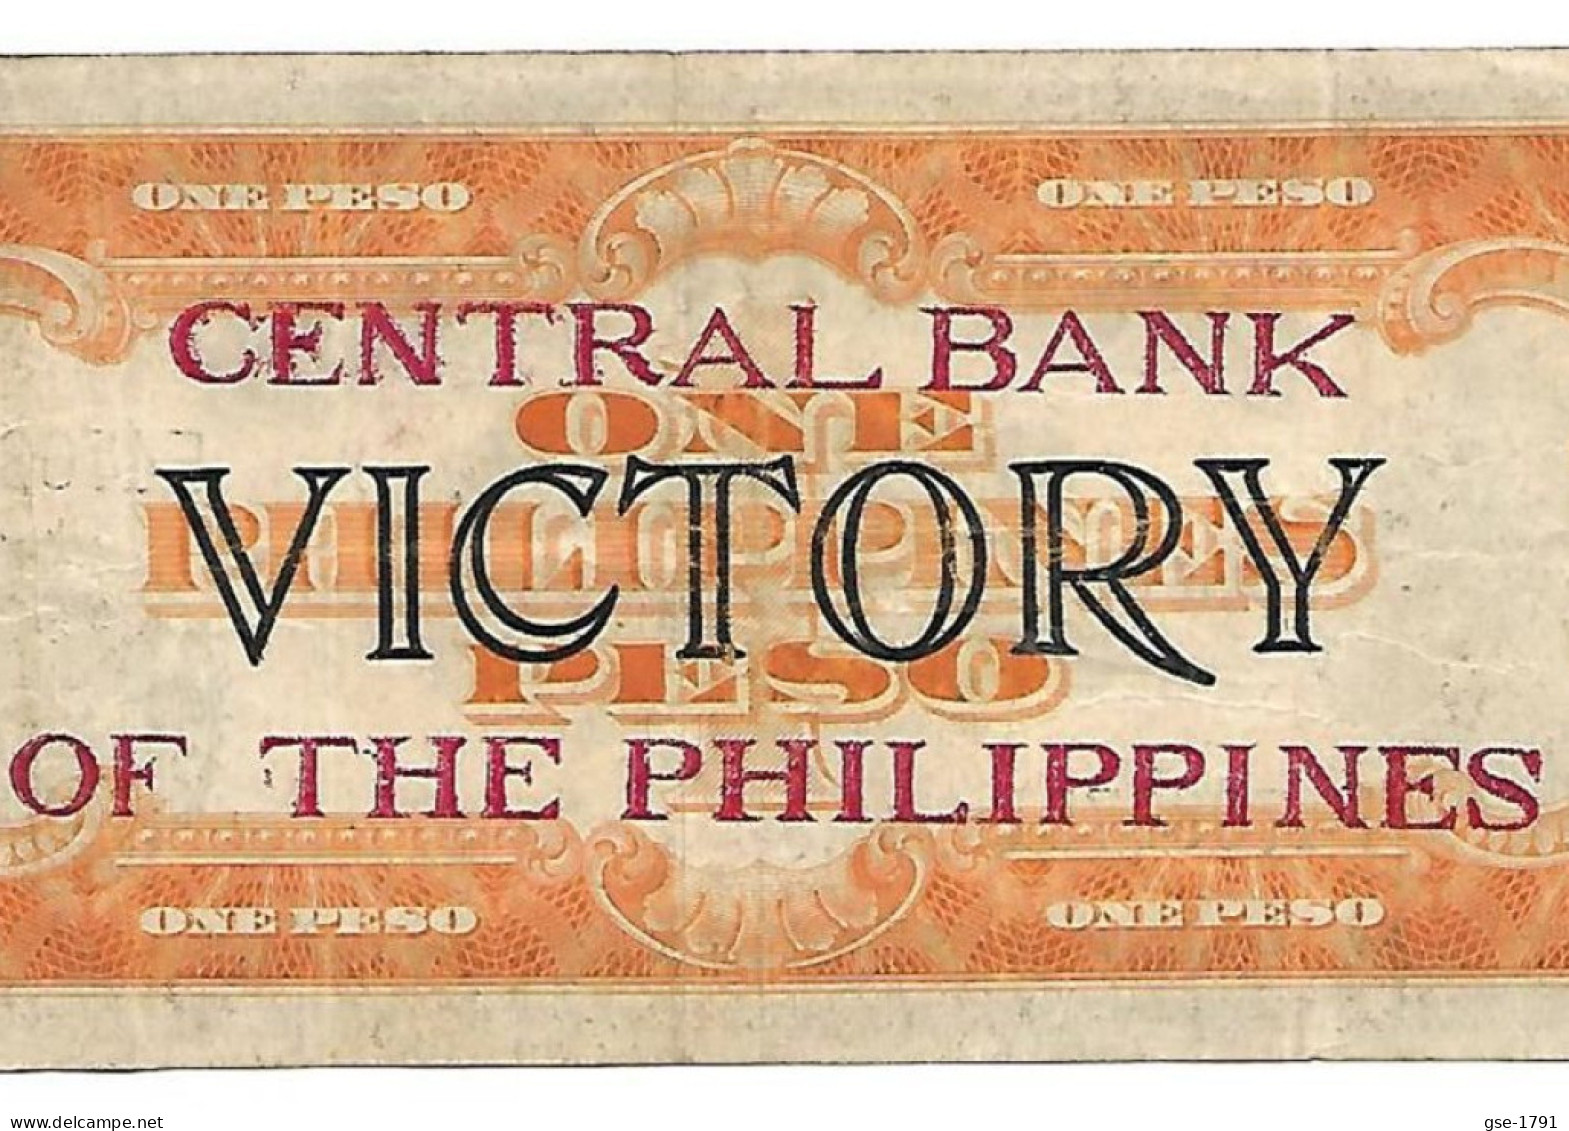 PHILIPPINES 1 Piso VICTORY N°66 MABINI  #117b     CENTRAL BANK  Moyen  TB - Philippines